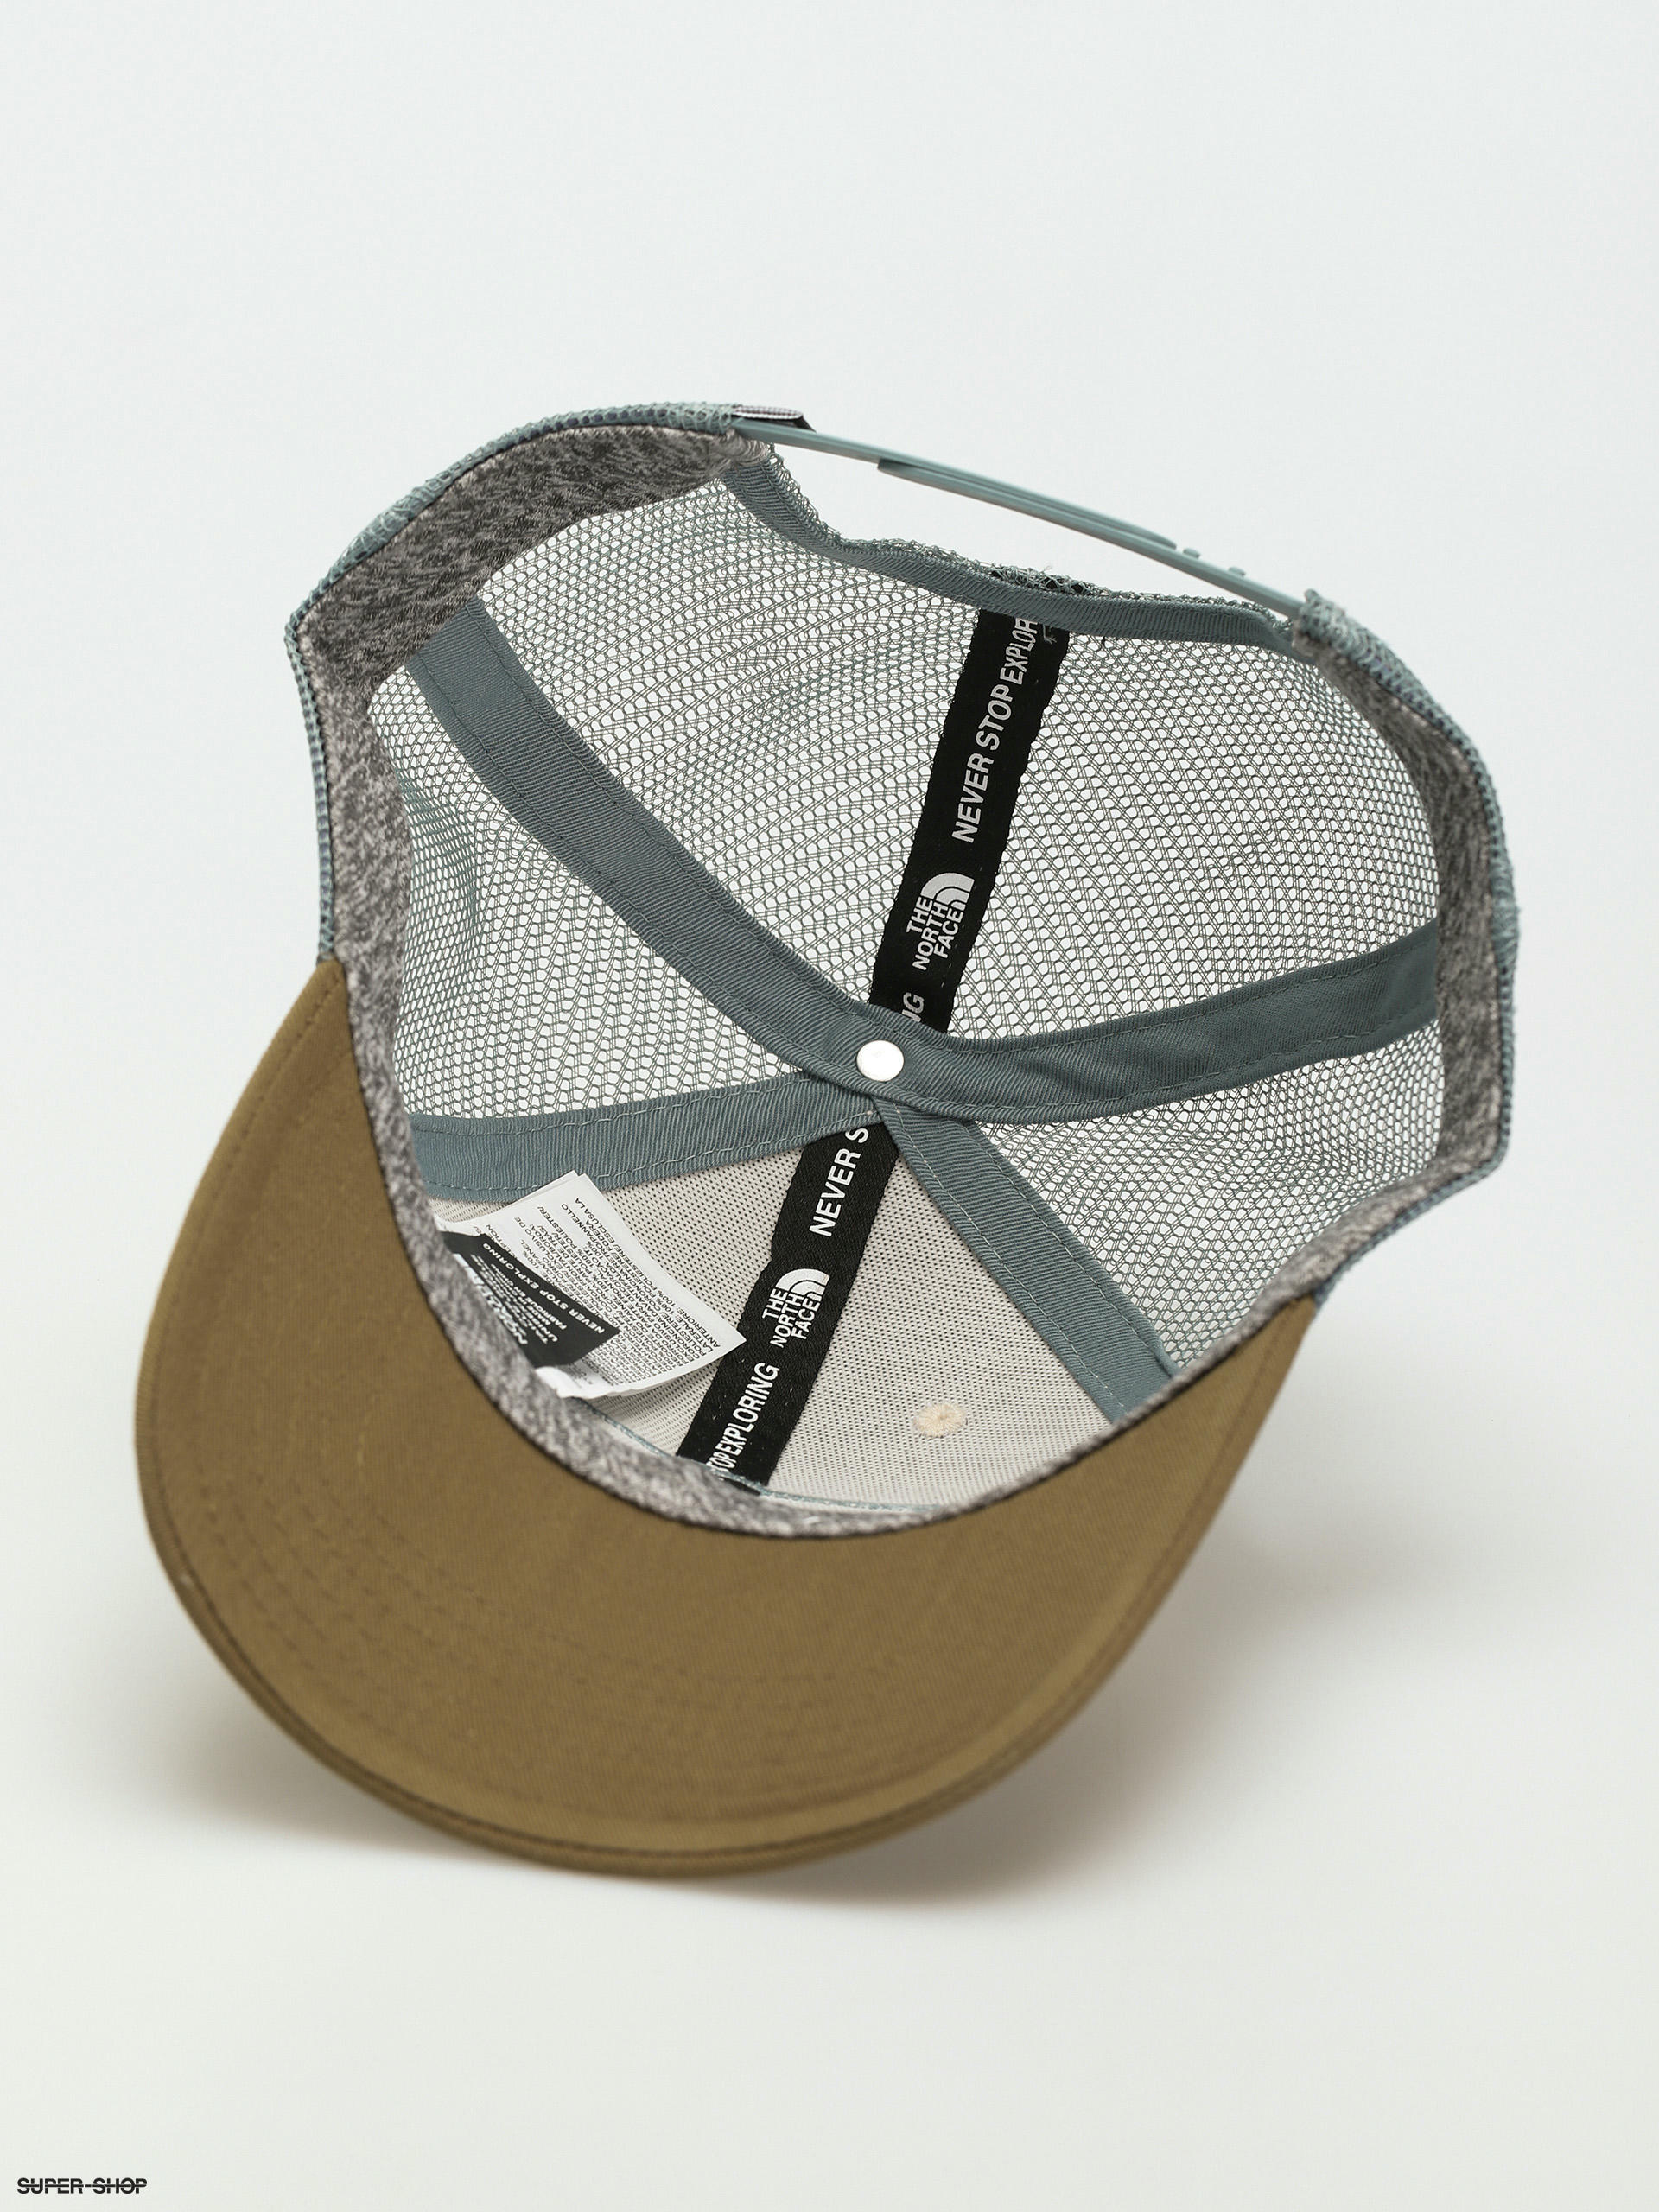 The North face Casquette Mudder Trucker